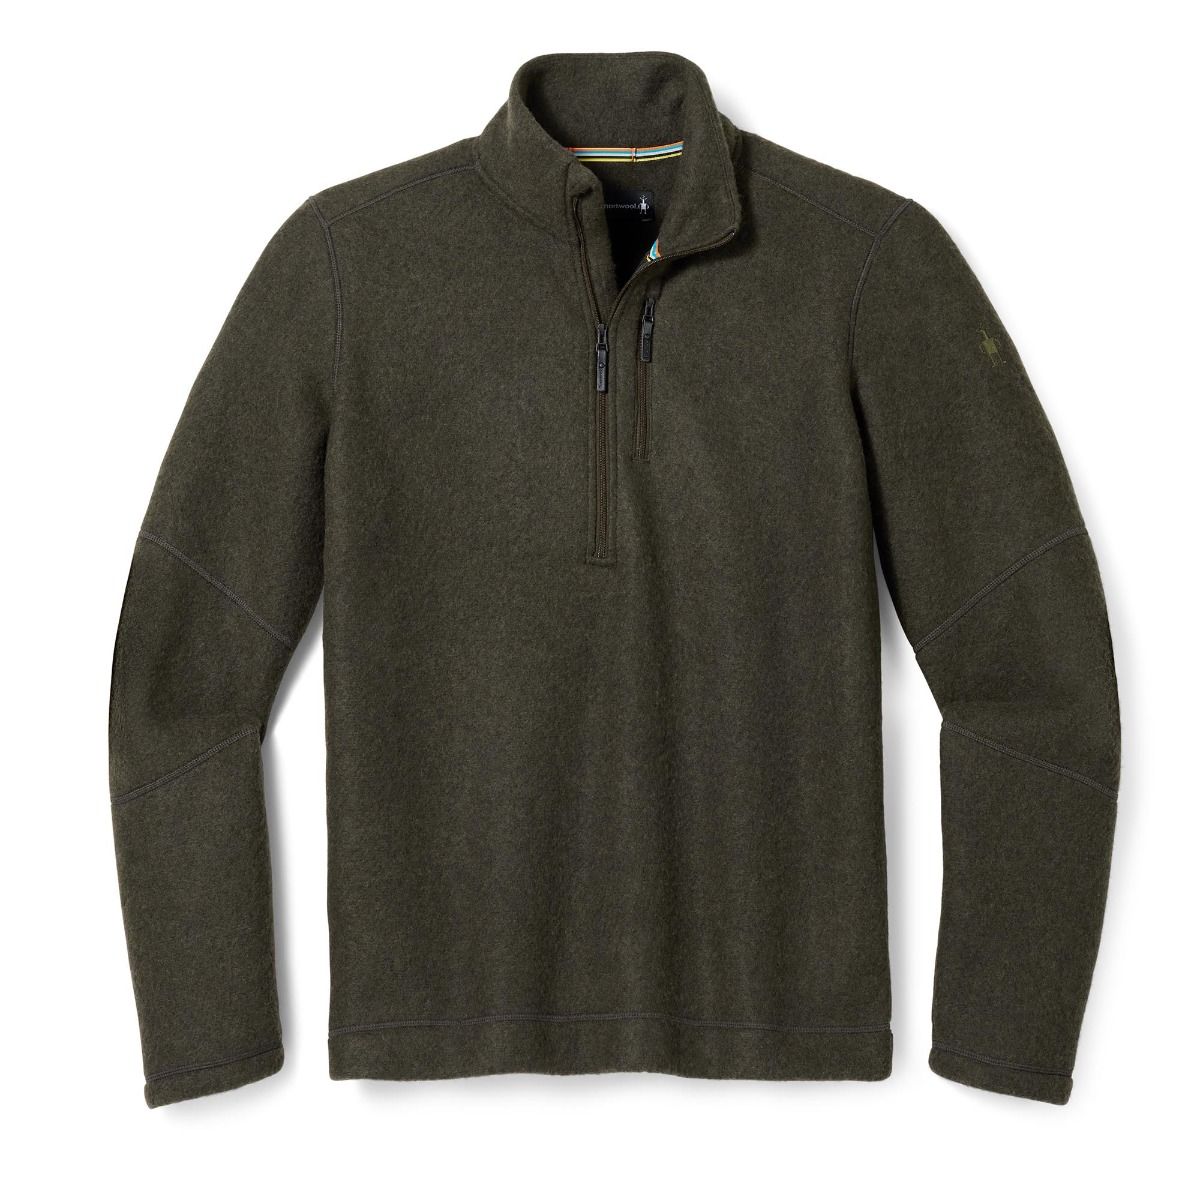 Smartwool Canada - The Hudson Trail Pullover Fleece Sweater keeps